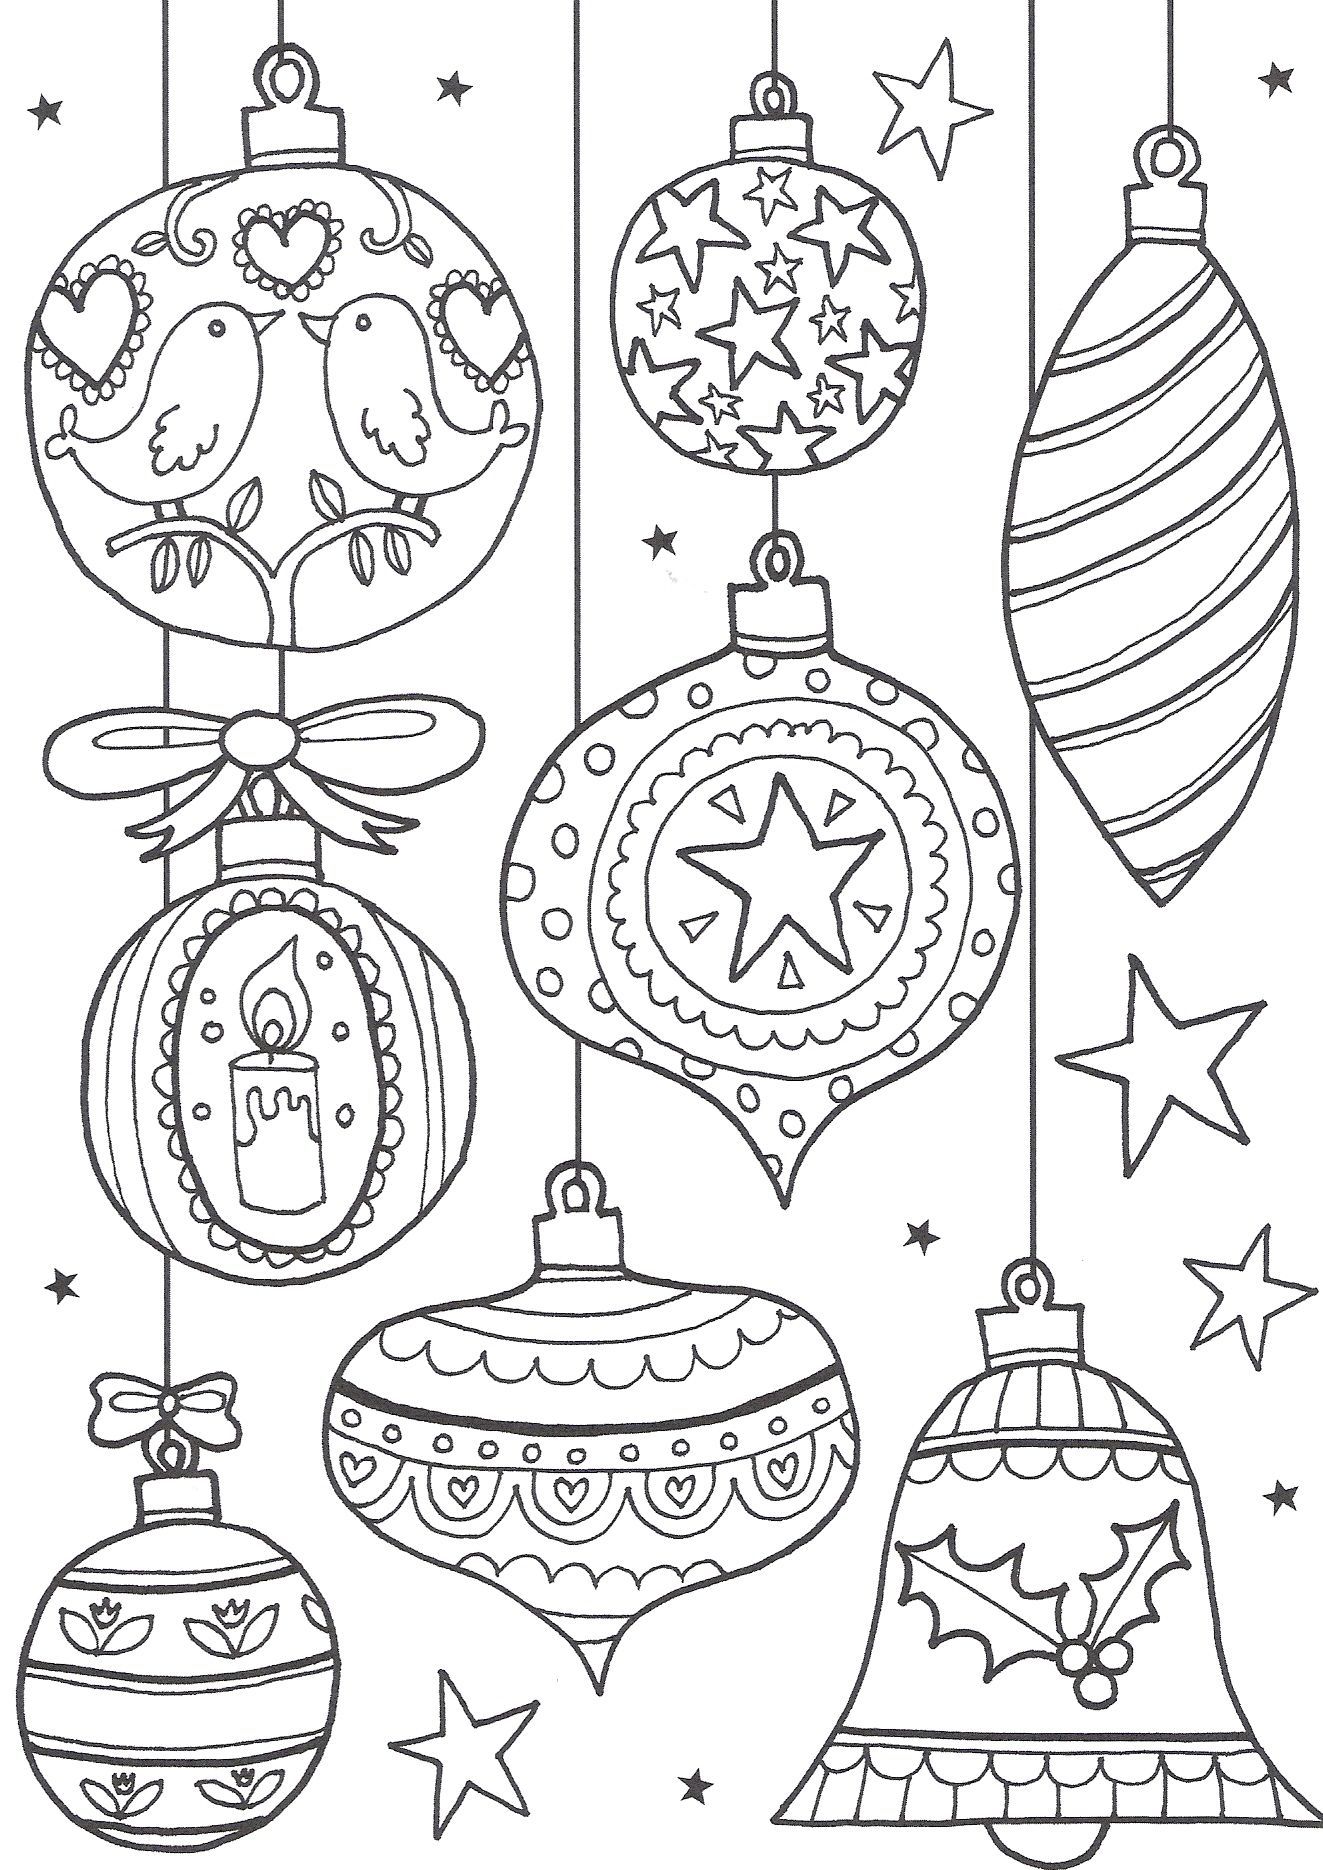 Free Christmas Colouring Pages for Adults – The Ultimate Roundup